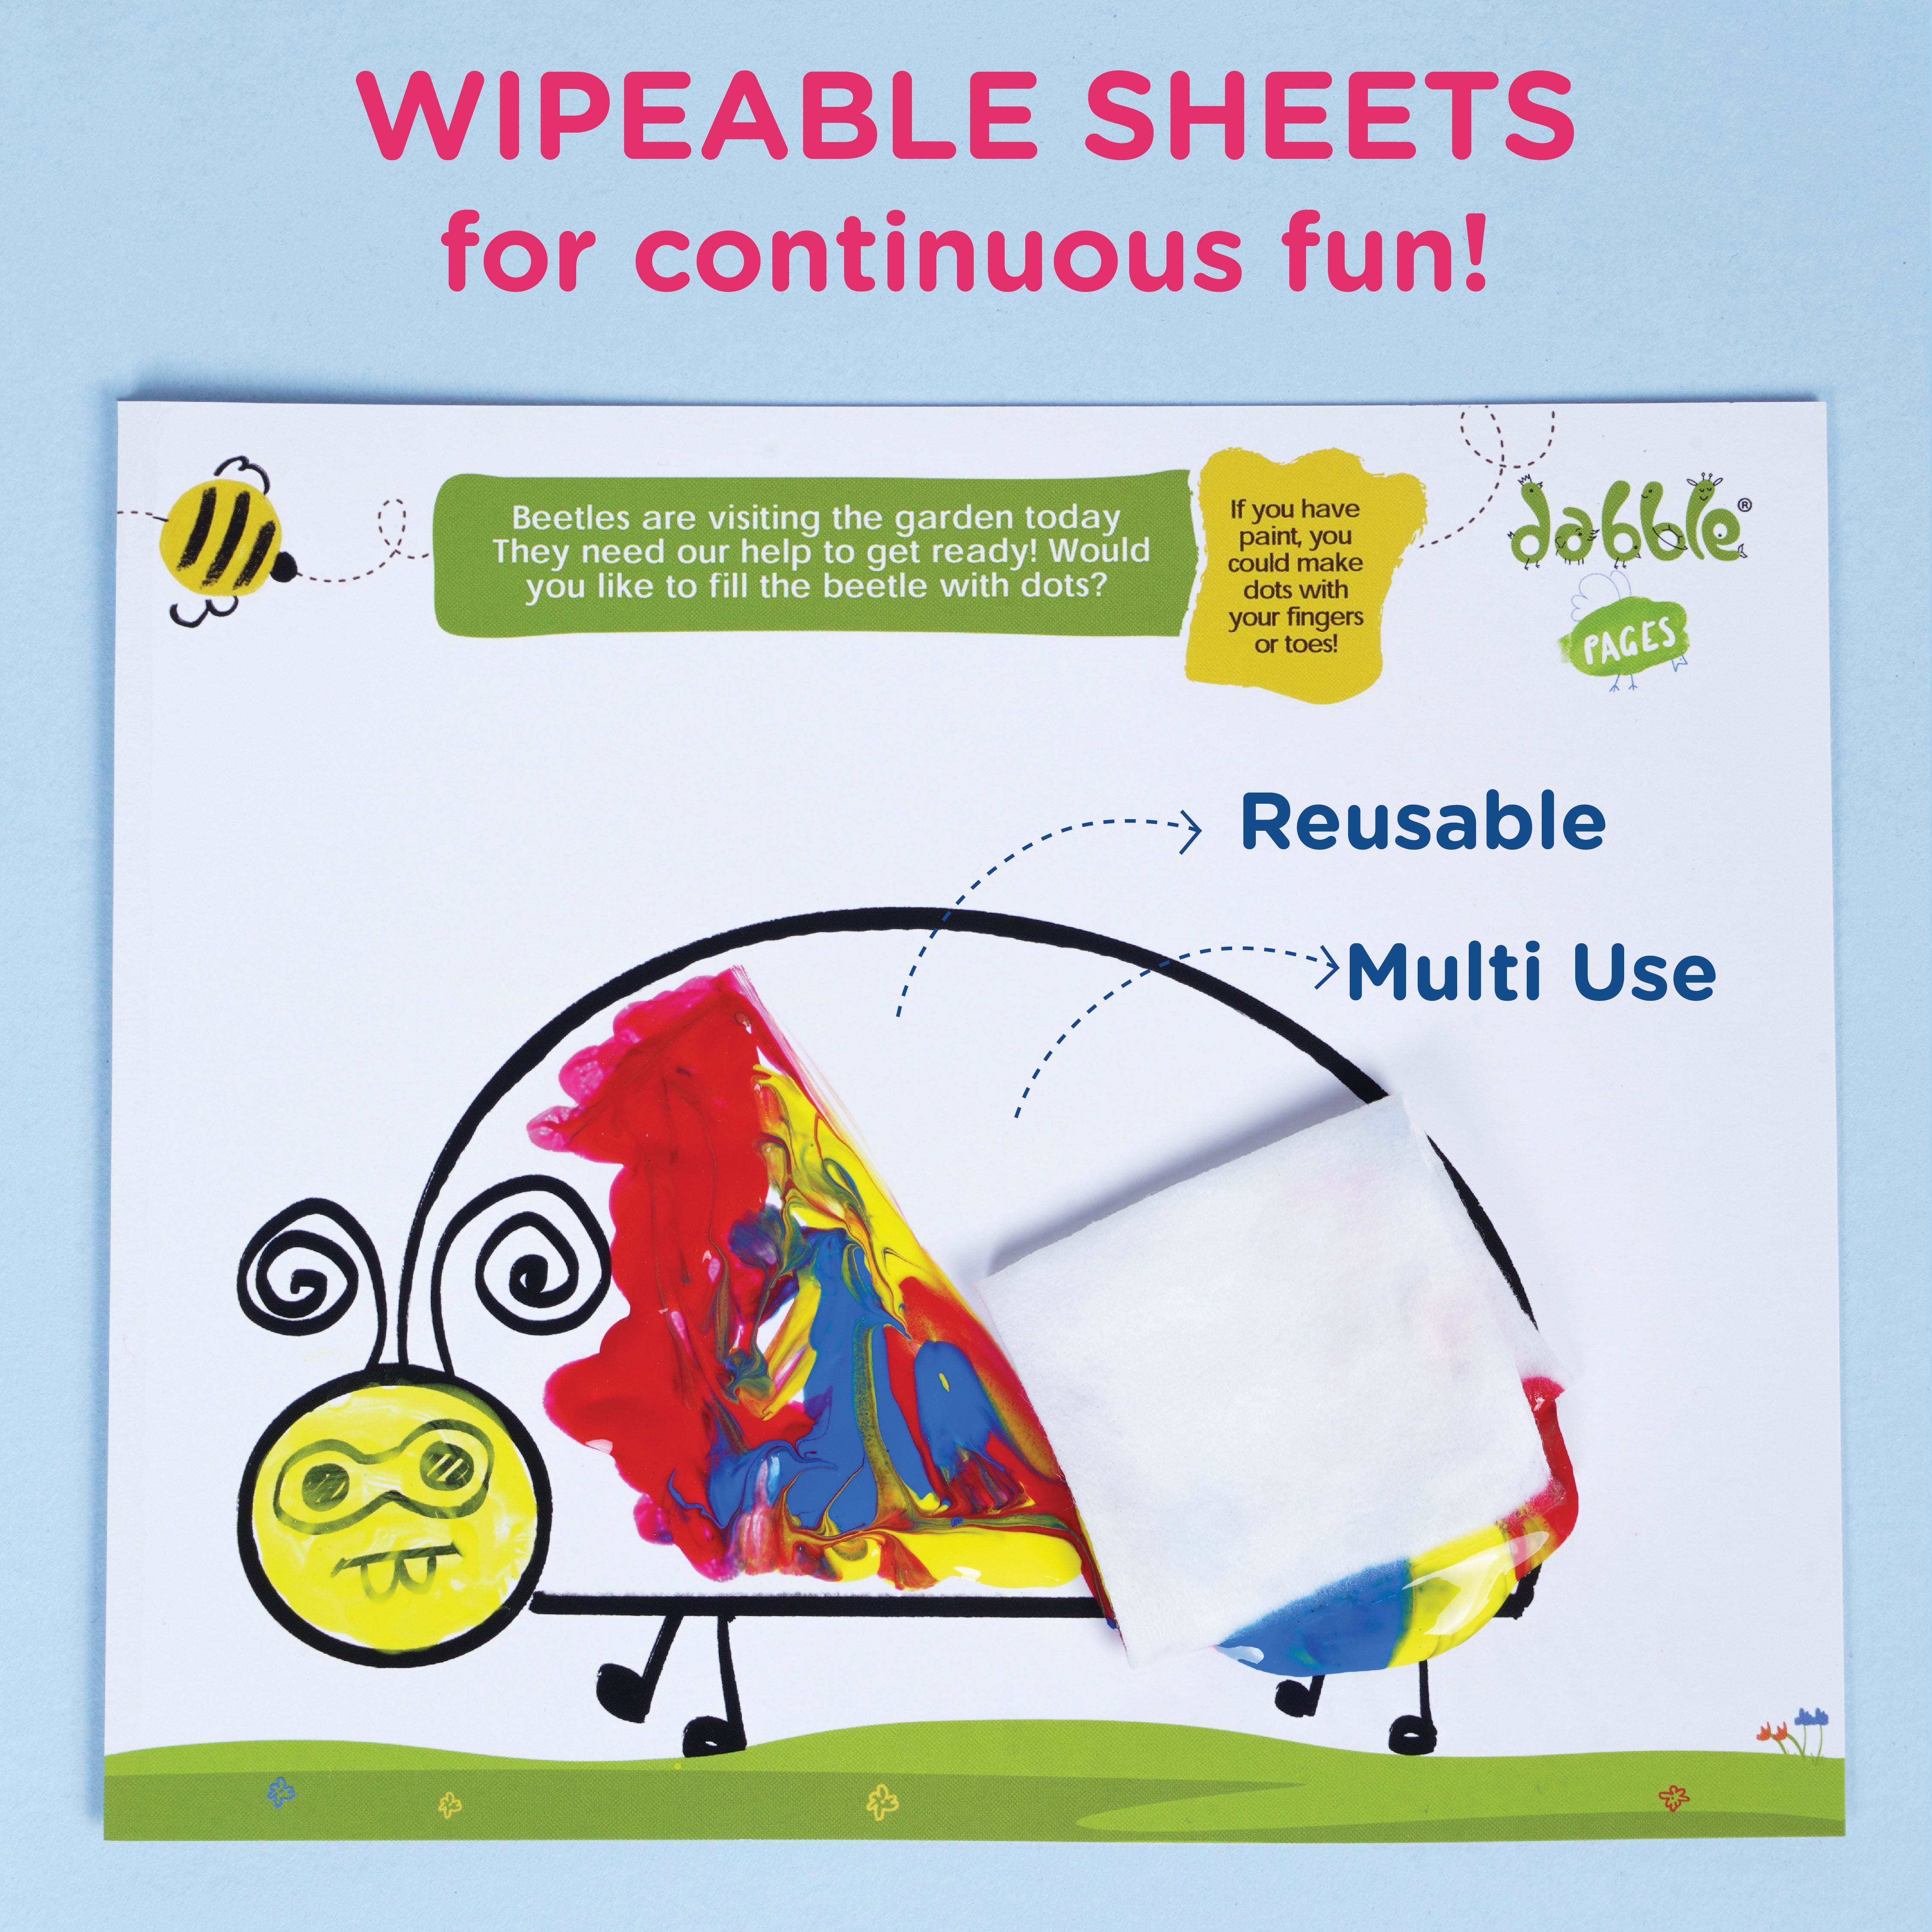 Dabble Reusable Colouring Pages and Glue Combo Gift Kit for kids